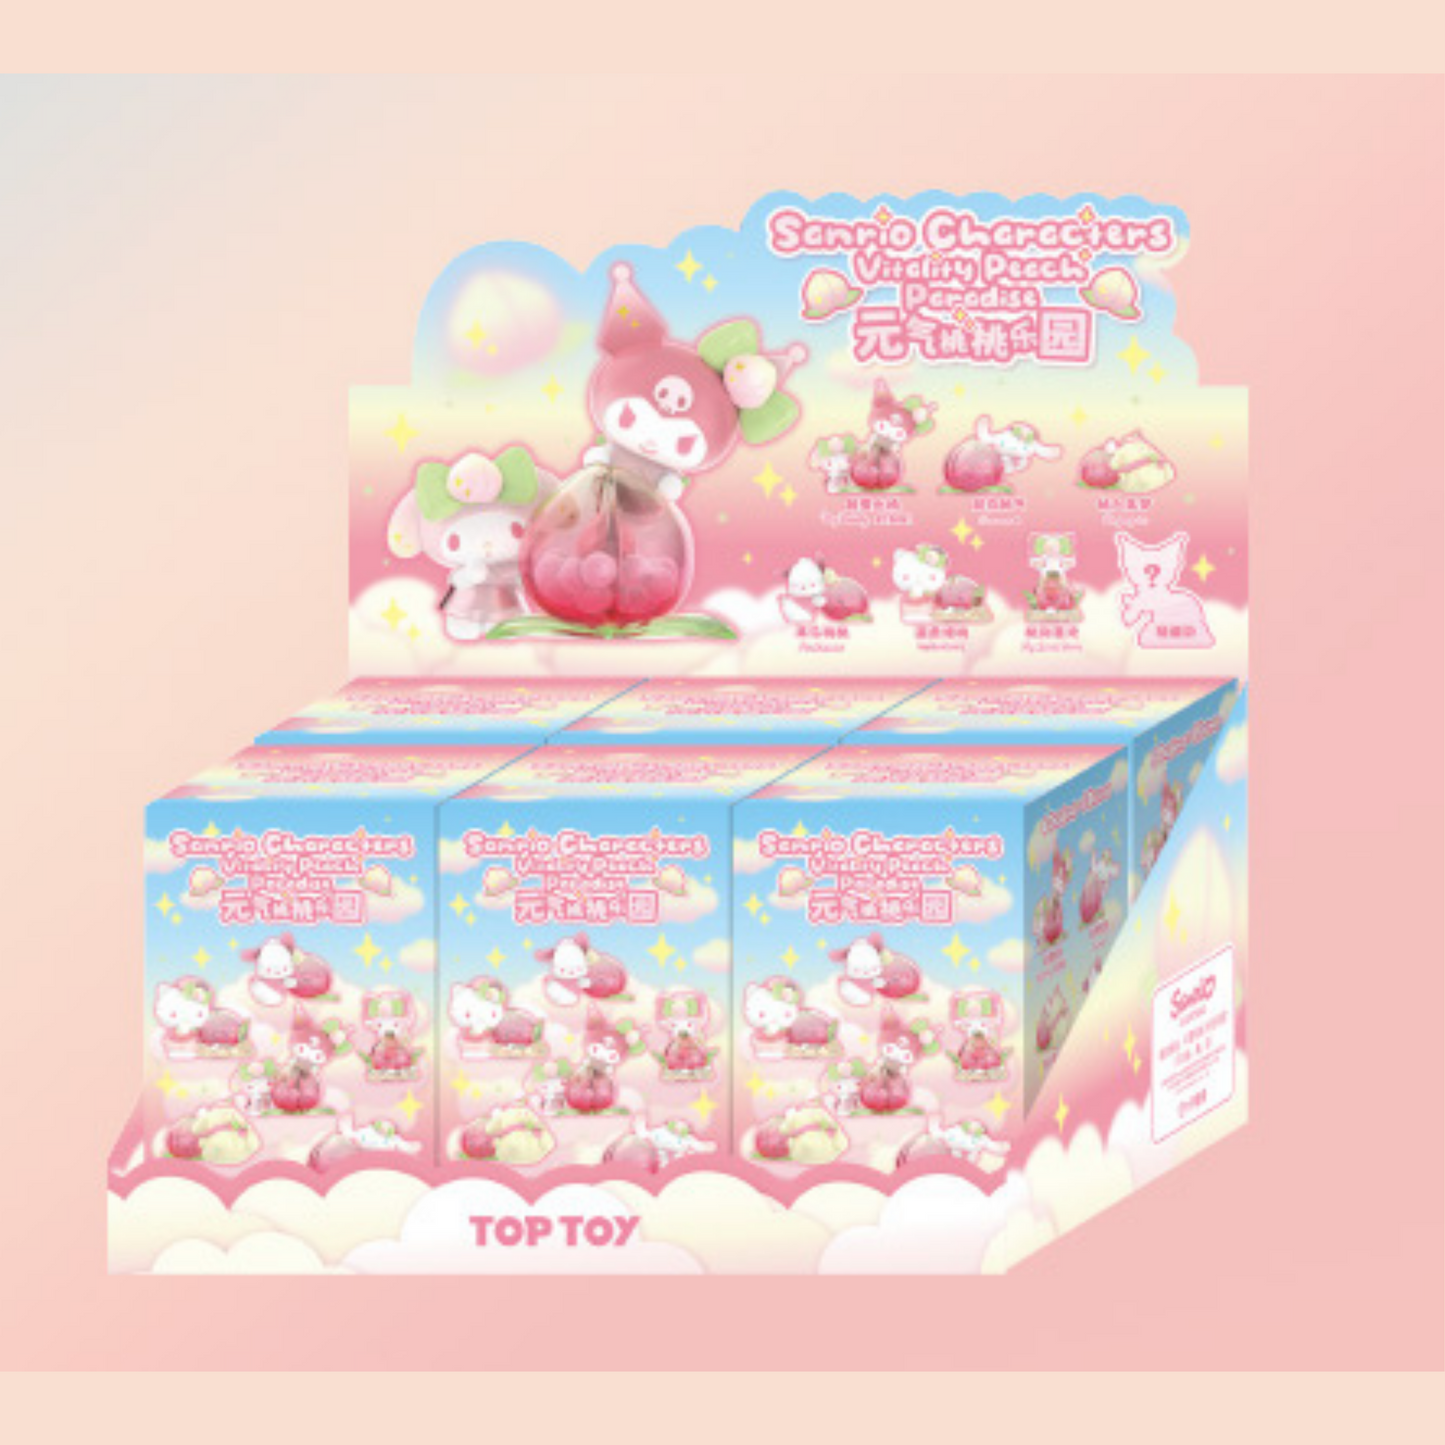 [New] Top Toy Sanrio Characters: Vitality Peach Paradise Series Blind Box - Whole Set 6